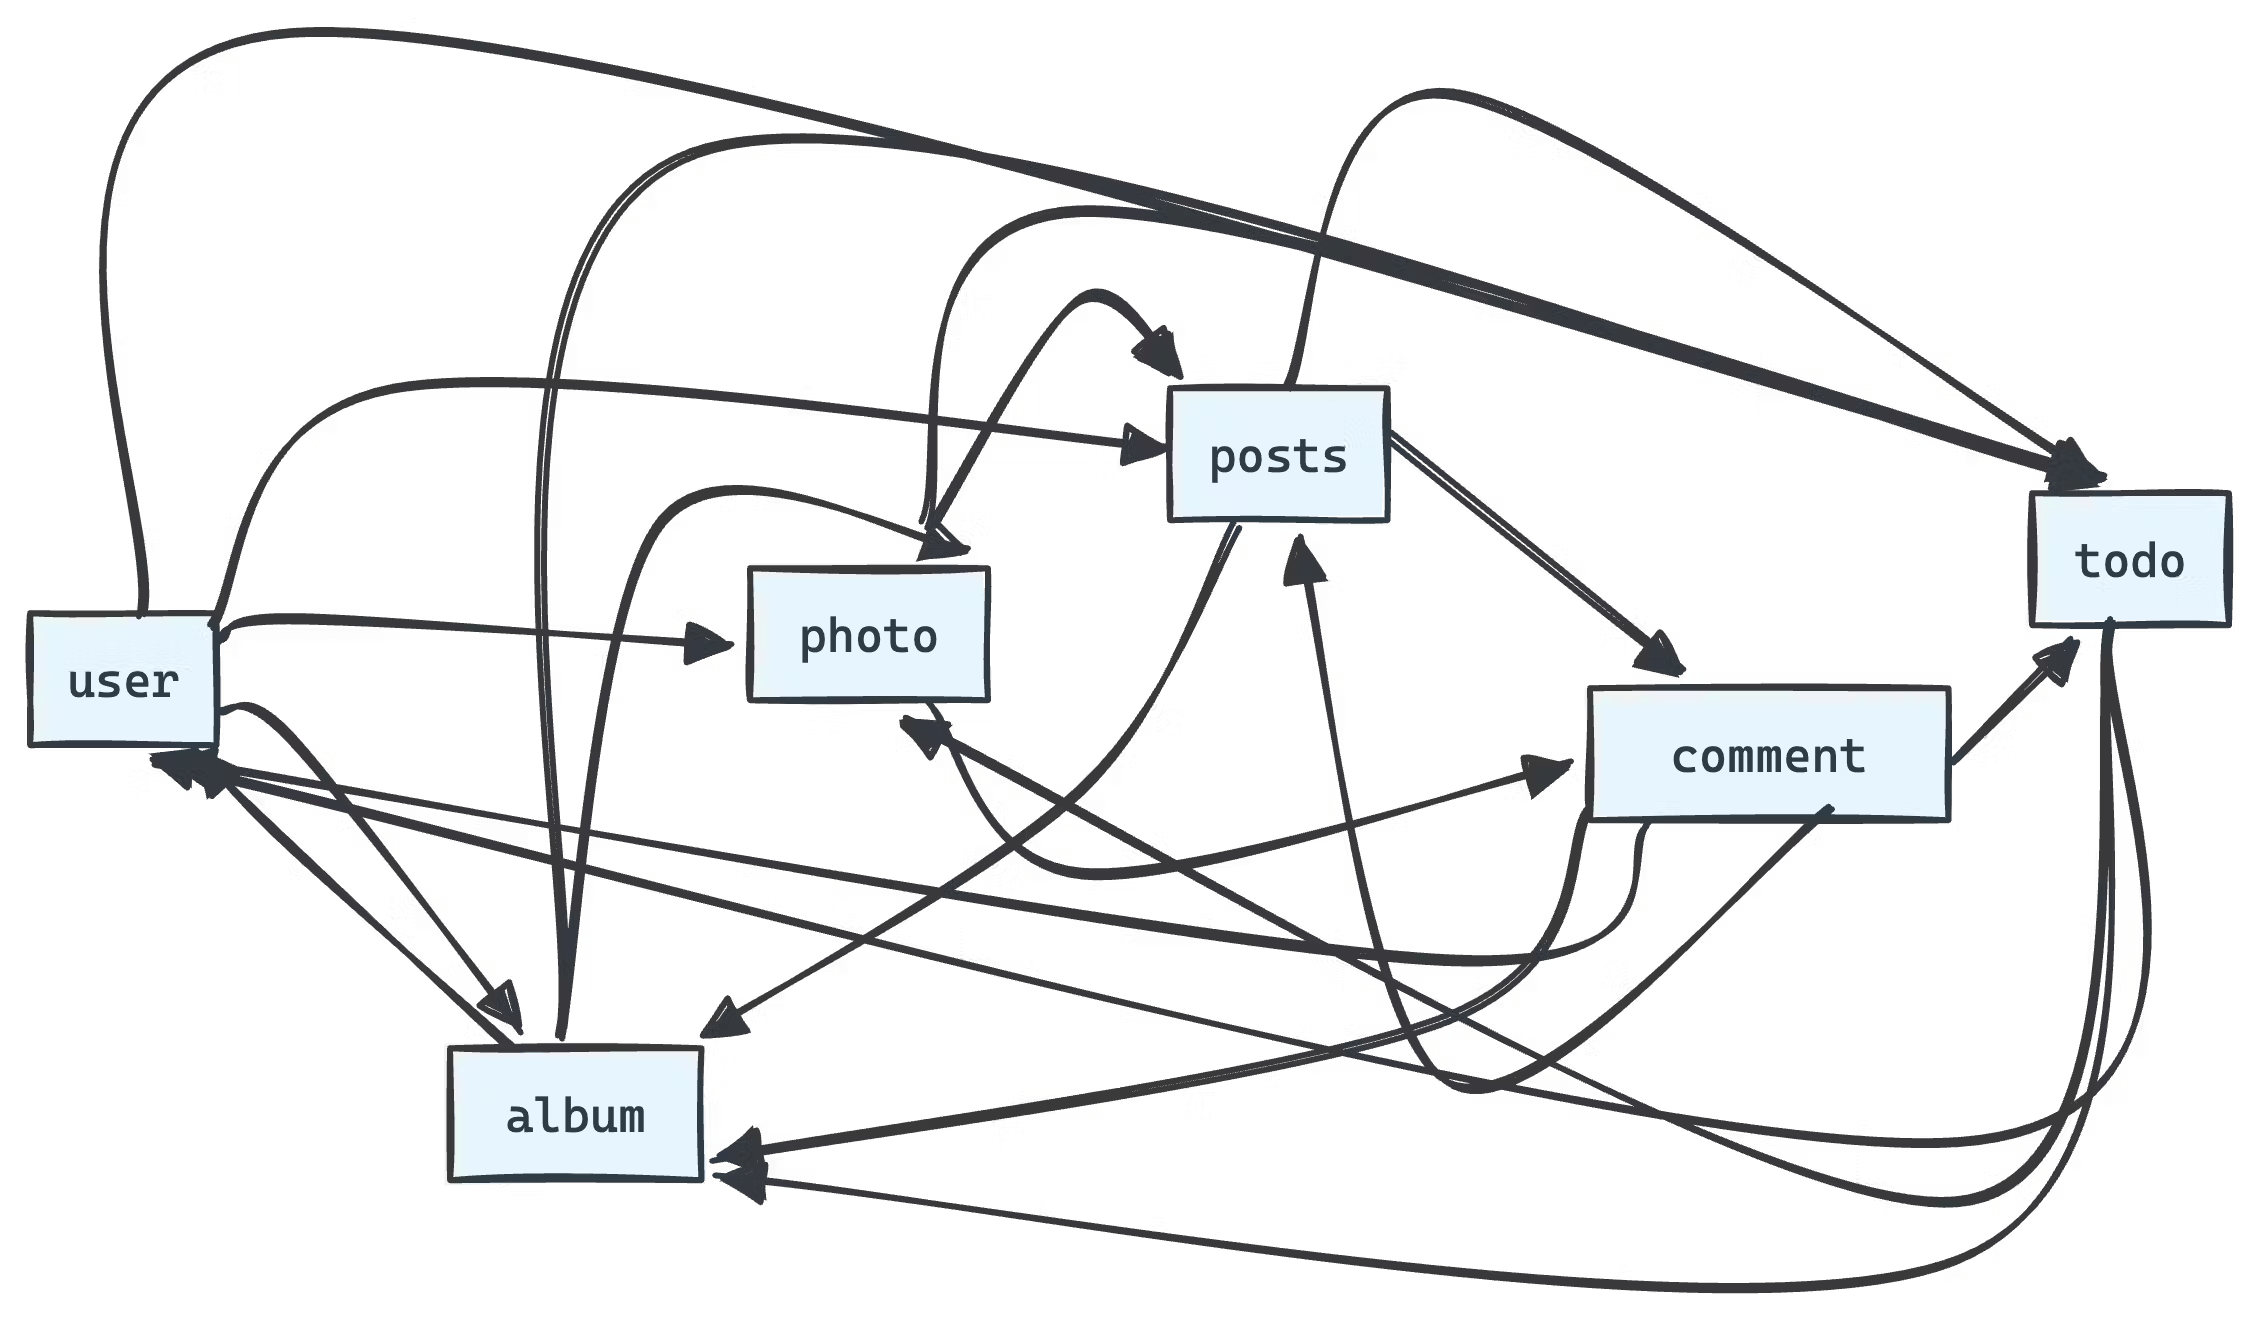 Image Demonstrating a graph of entities